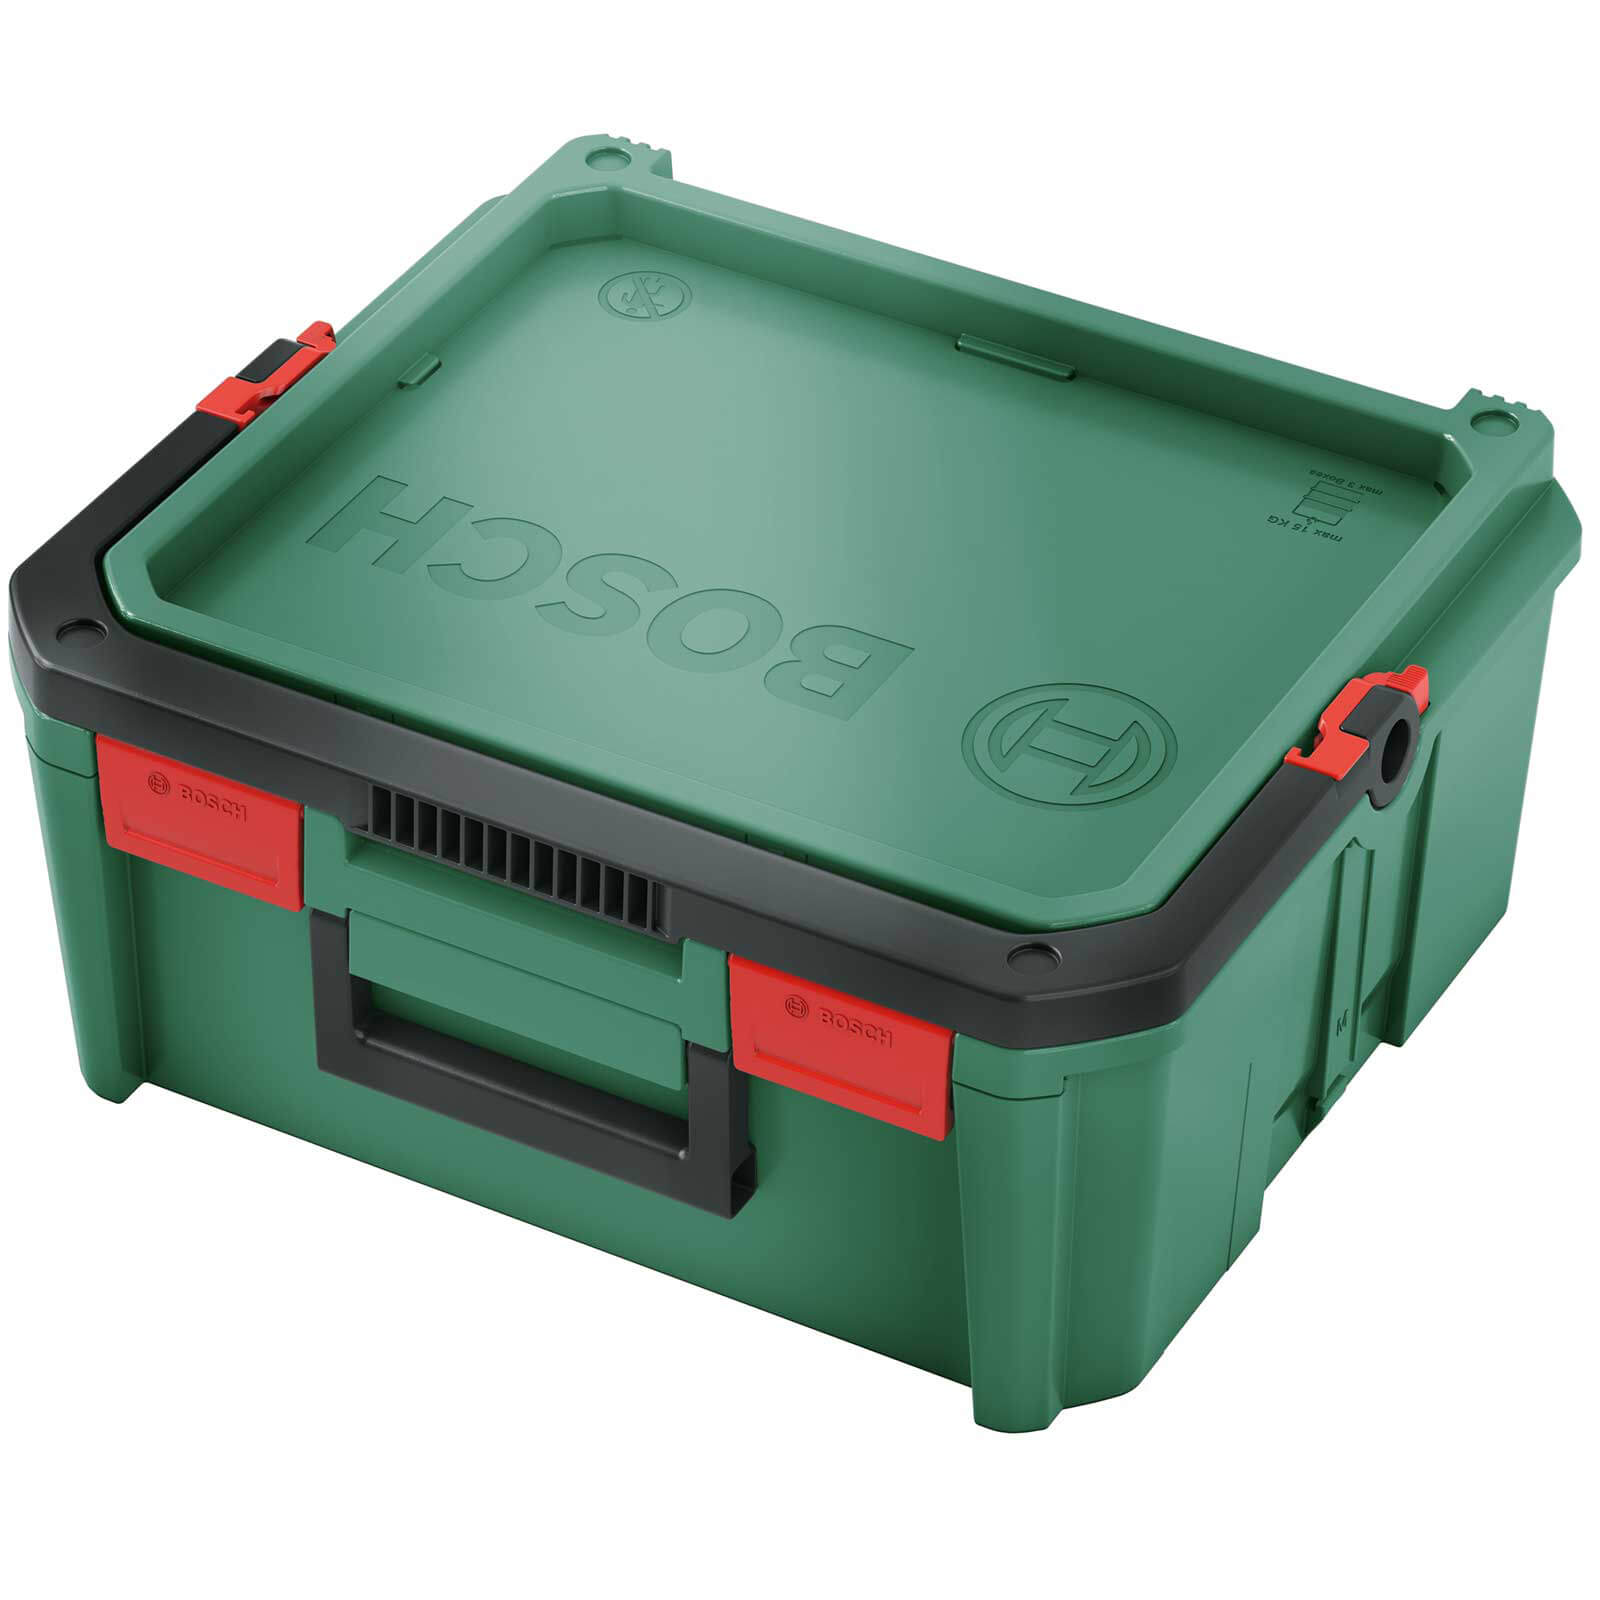 Photo of Bosch Systembox Stackable Medium Tool Storage Case